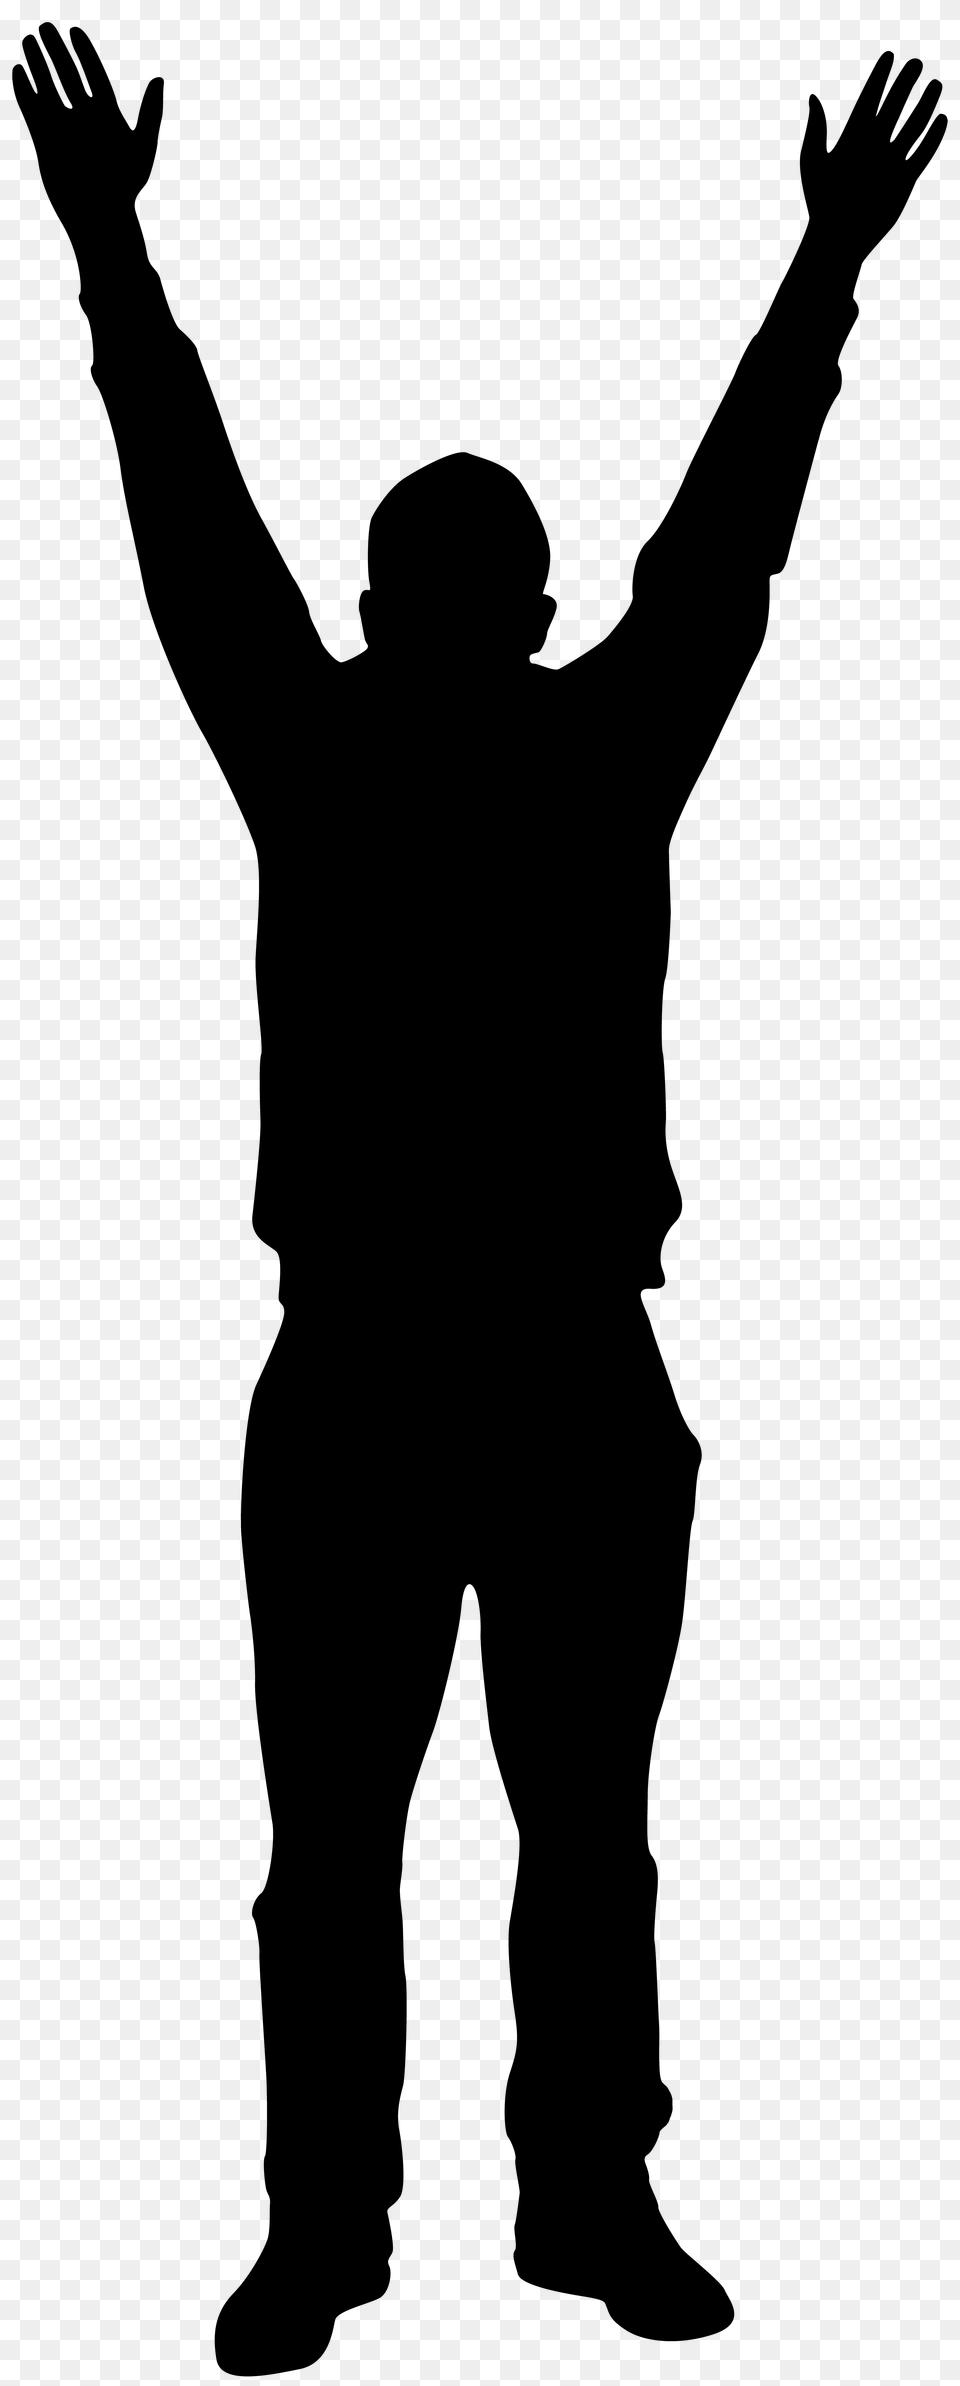 Man With Hands Up Silhouette Clip Art Gallery, Bag, Text Png Image